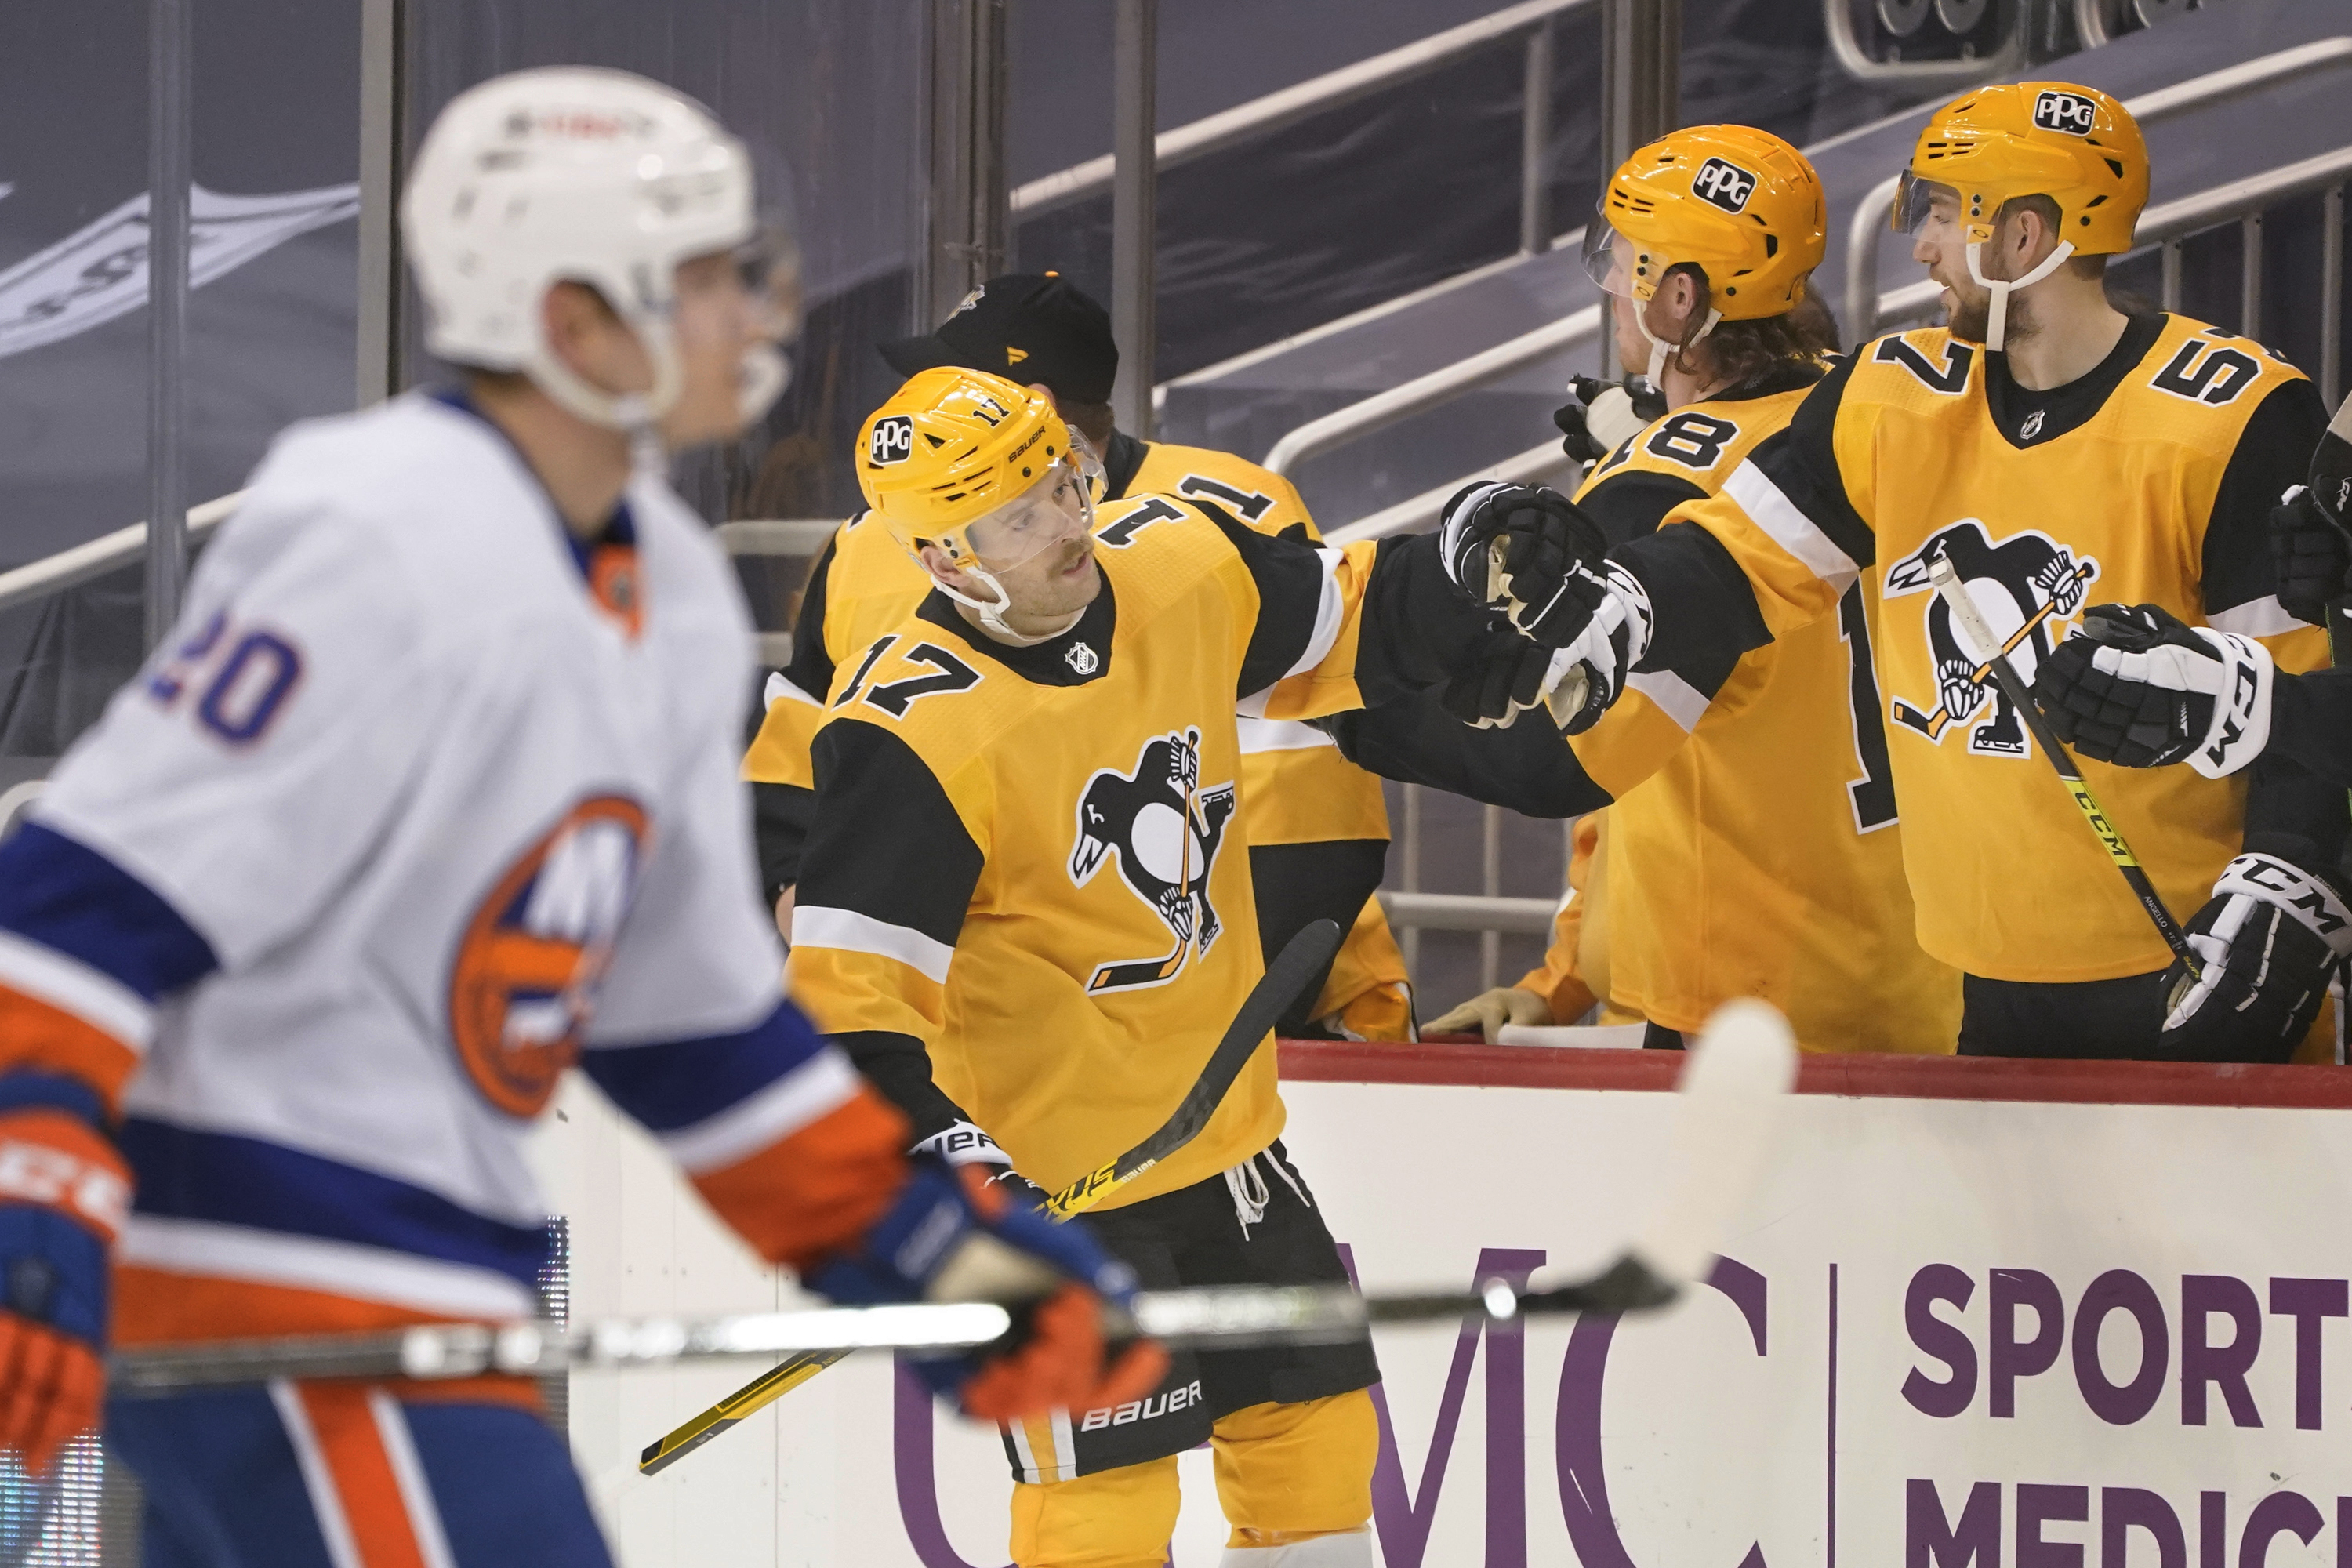 stream pittsburgh penguins game free